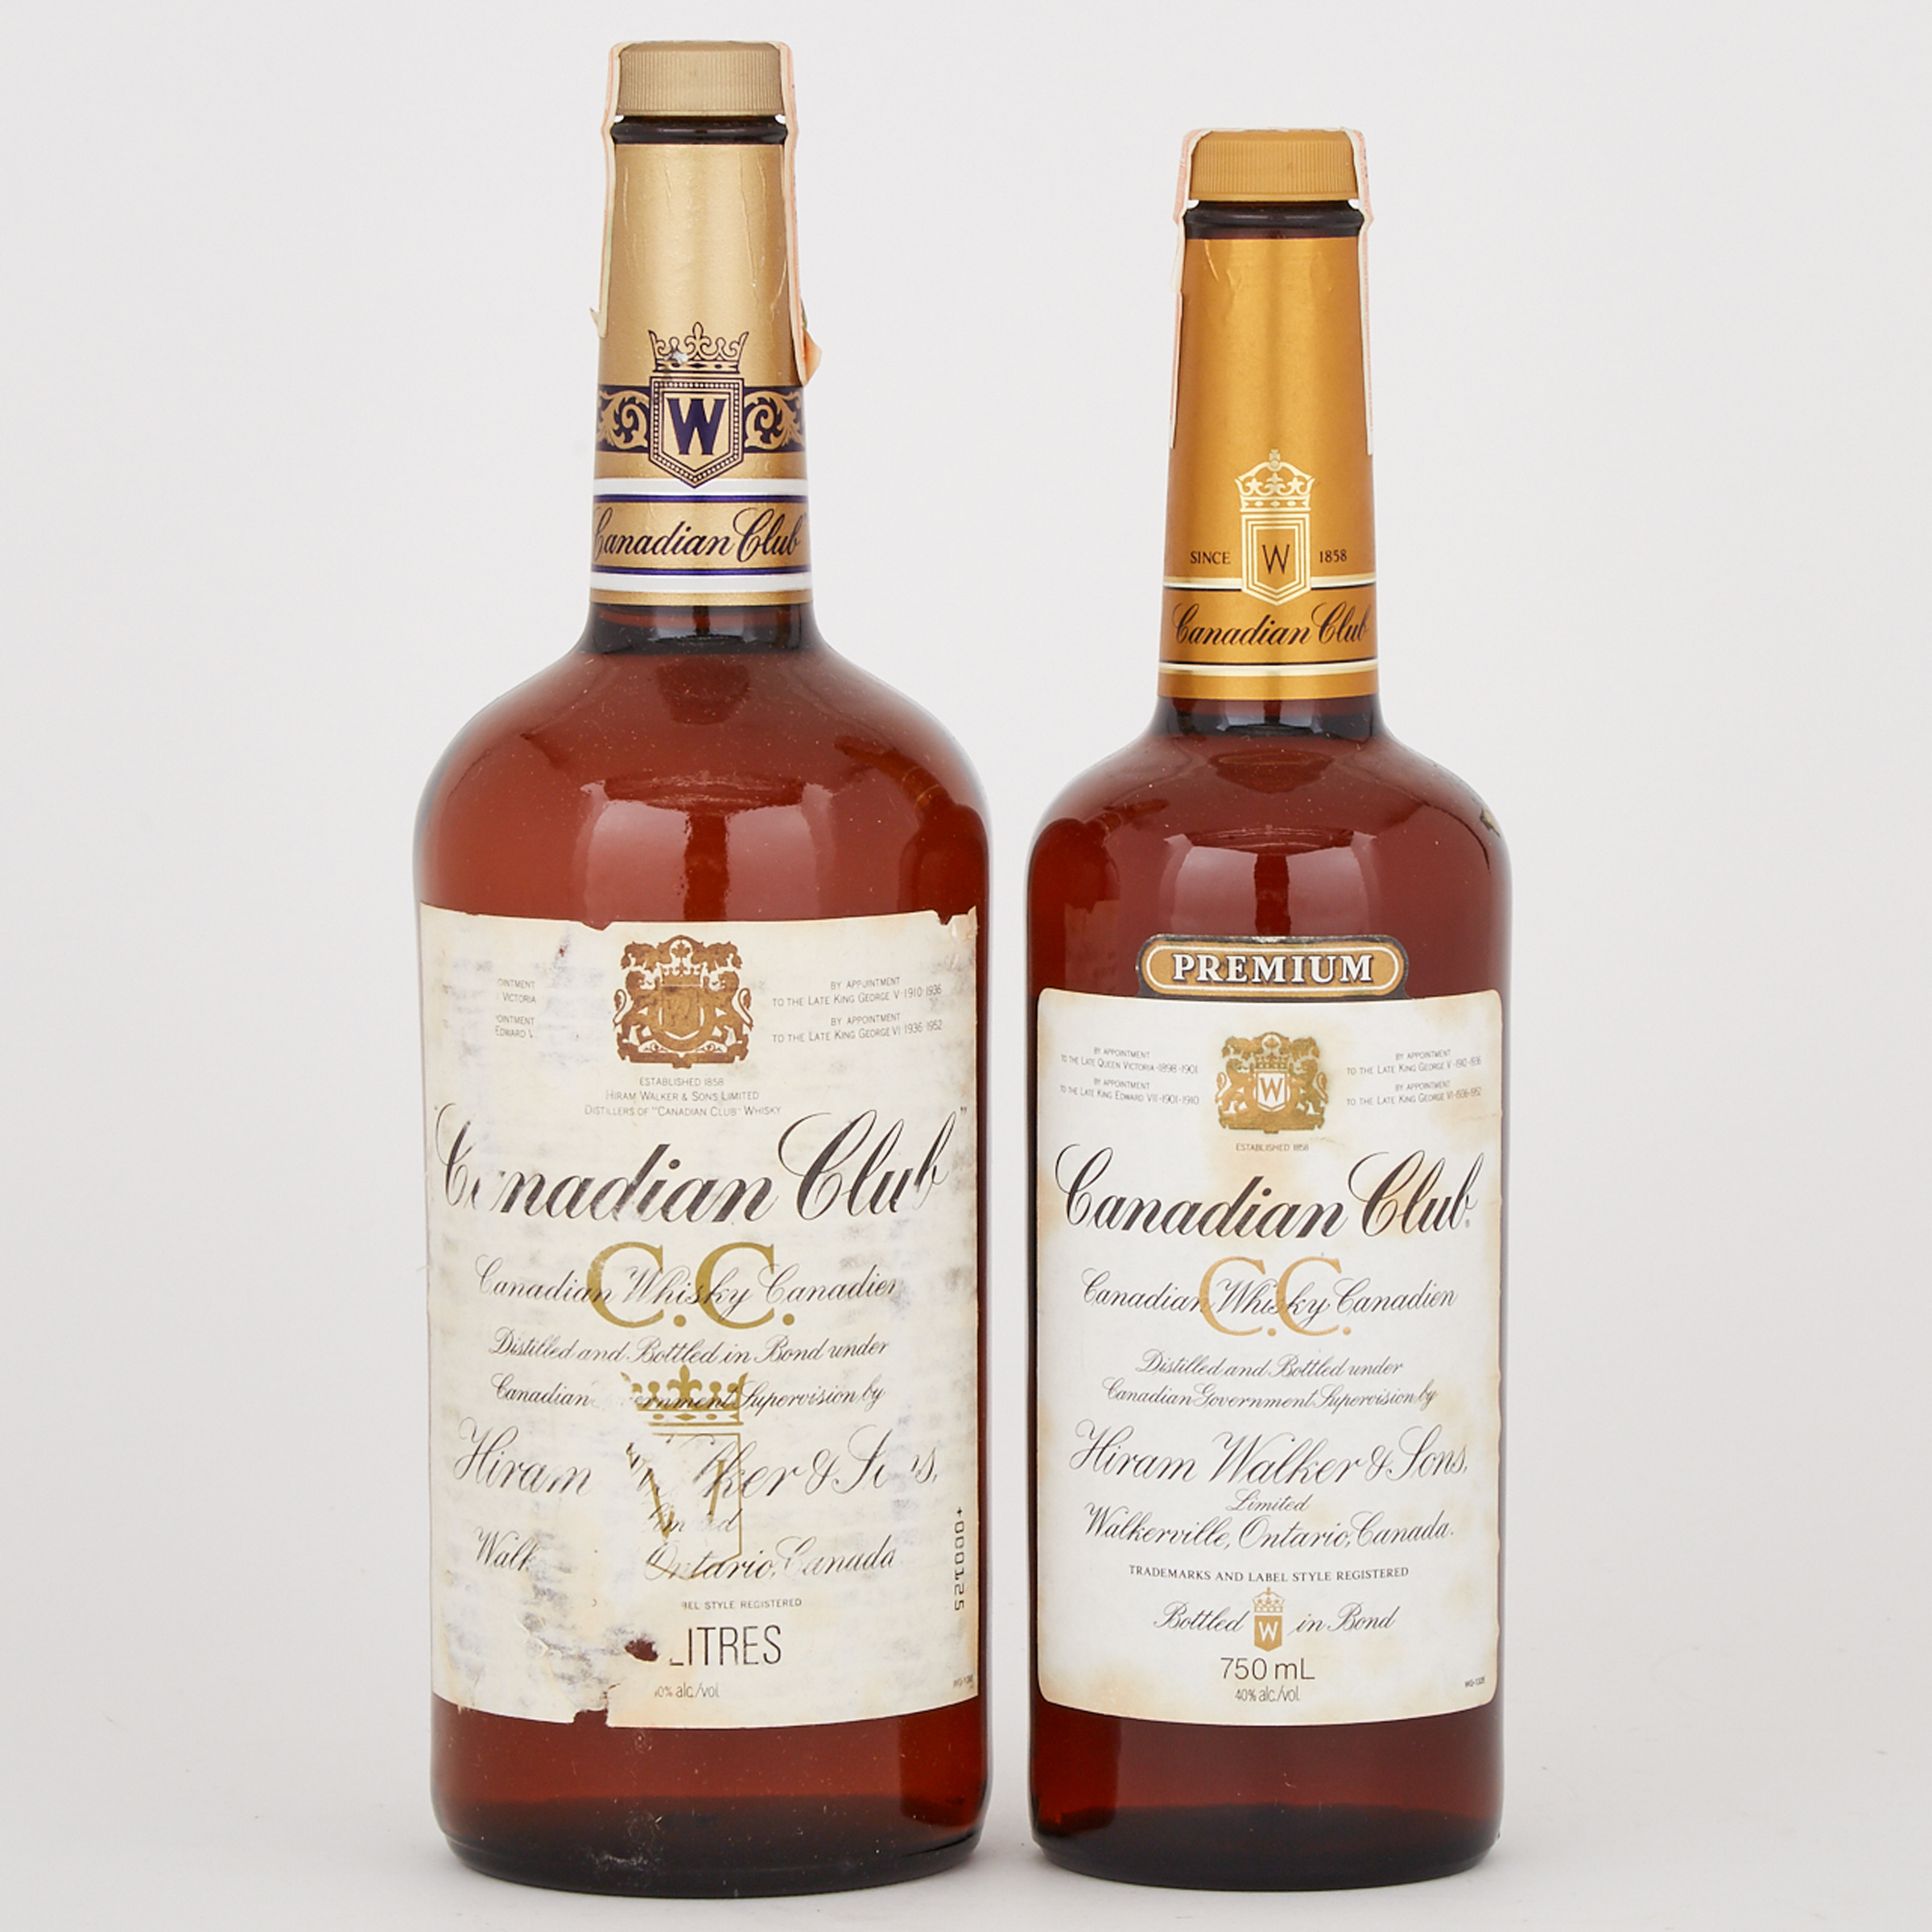 CANADIAN CLUB CANADIAN WHISKY NAS (ONE 1000 ML)
CANADIAN CLUB PREMIUM CANADIAN WHISKY 15 YRS (ONE 750 ML)